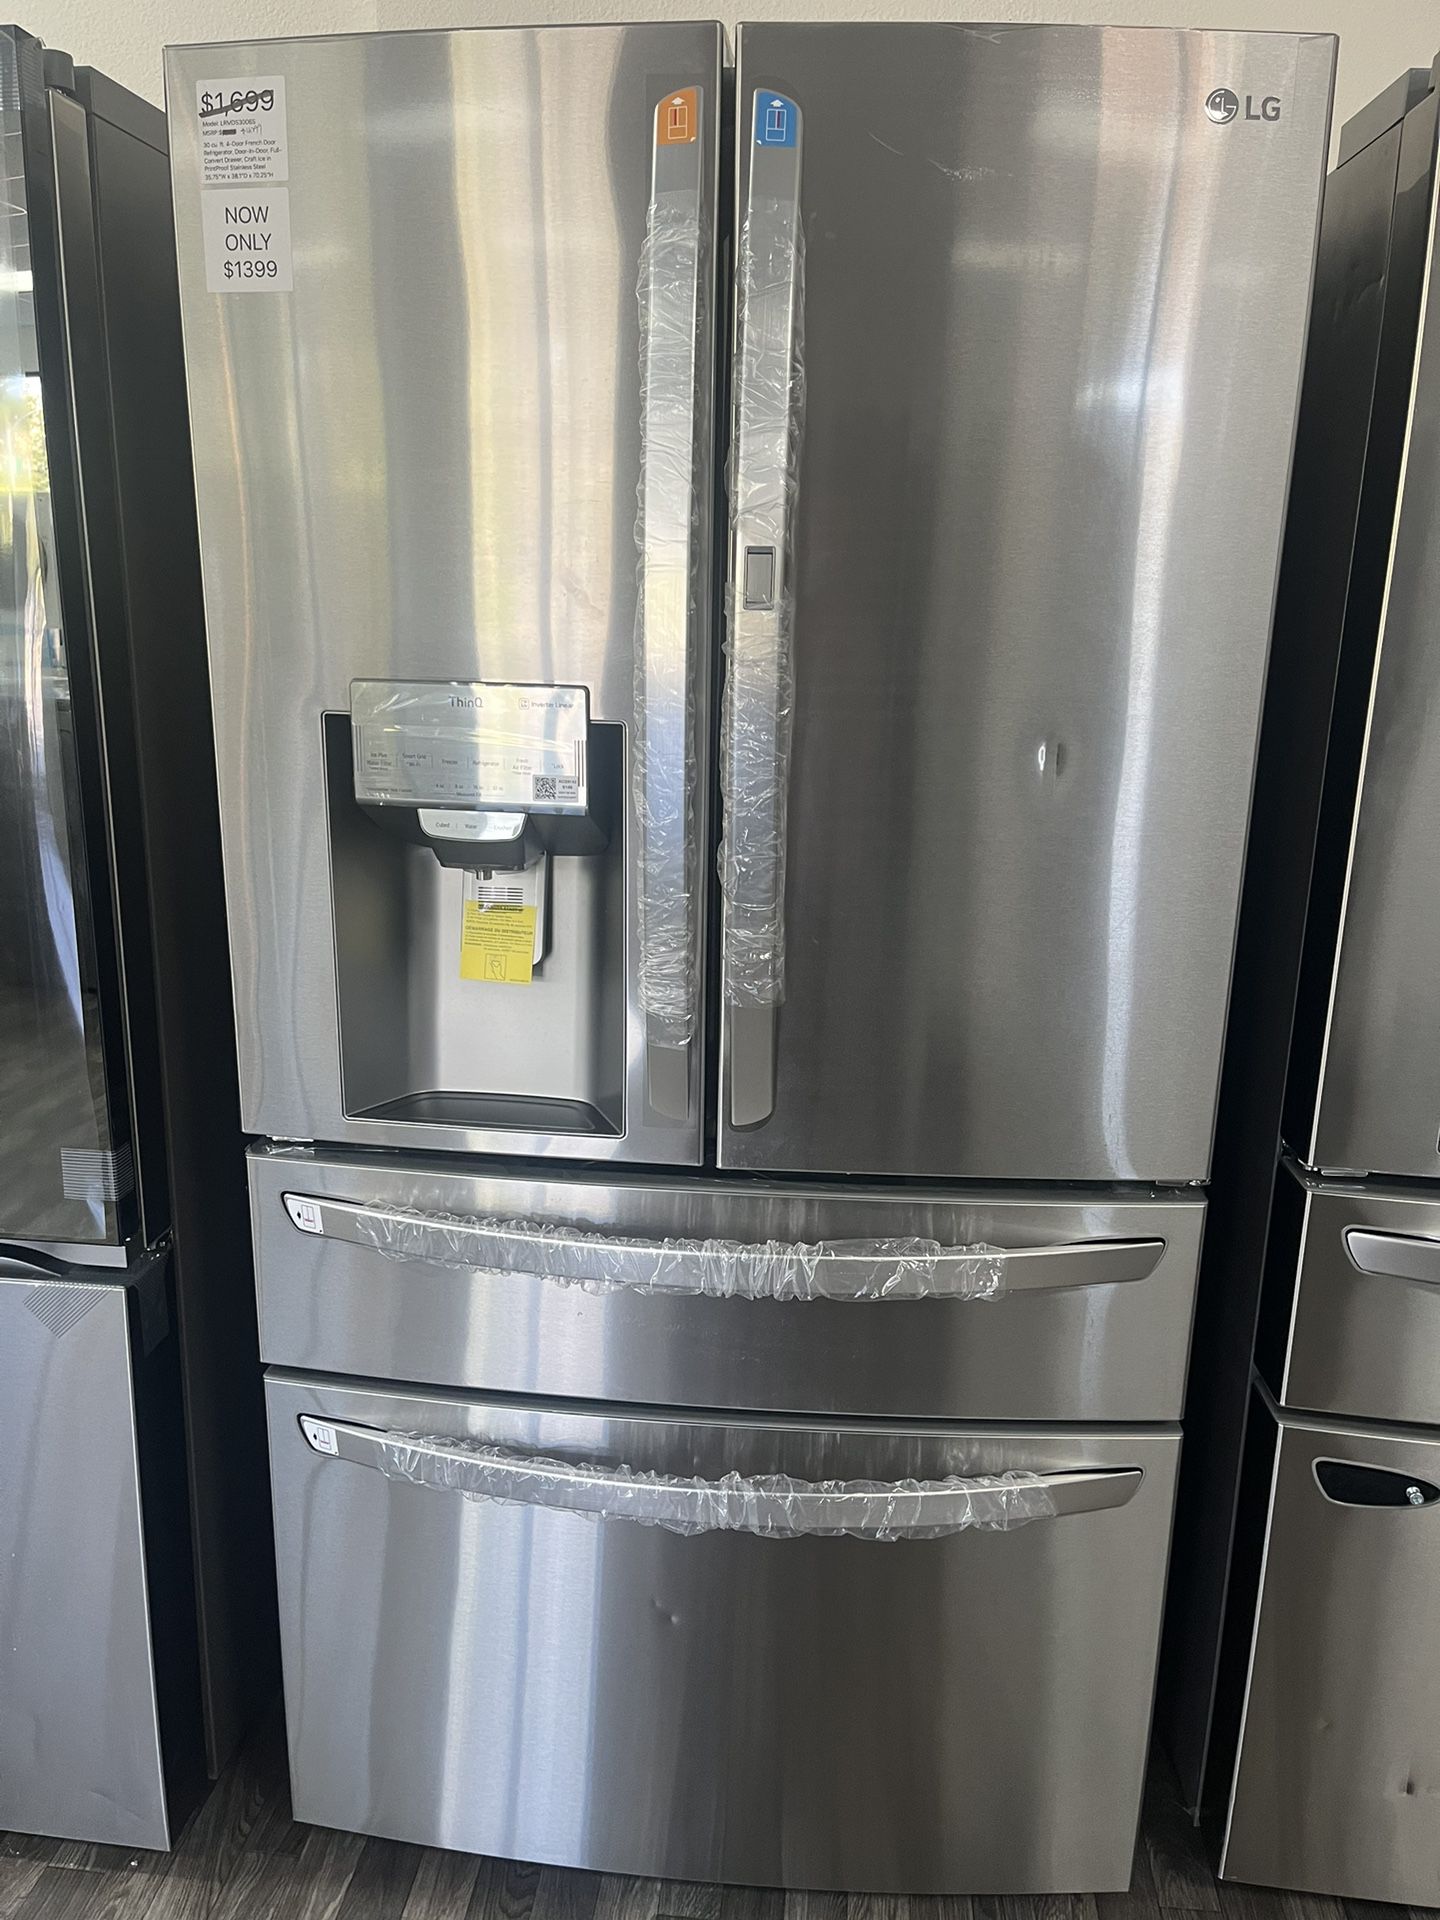 Hot Deal / LG French Door Refrigerator With Convert Drawer And Craft Ice Maker WAS$4299 Now$1399